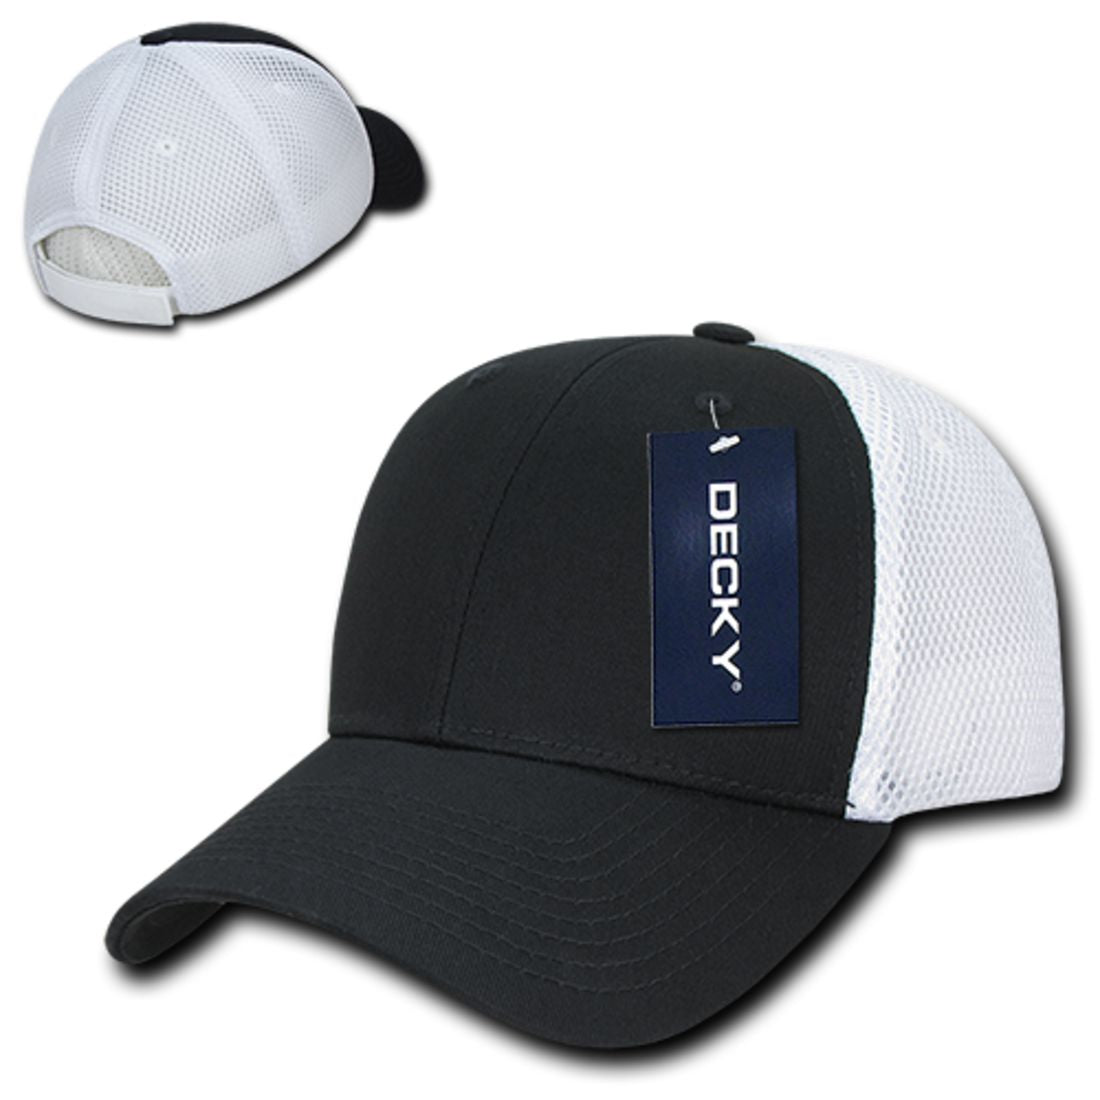 Decky 204 Air Mesh Trucker Hats Low Profile 6 Panel Curved Bill Baseball Caps Wholesale